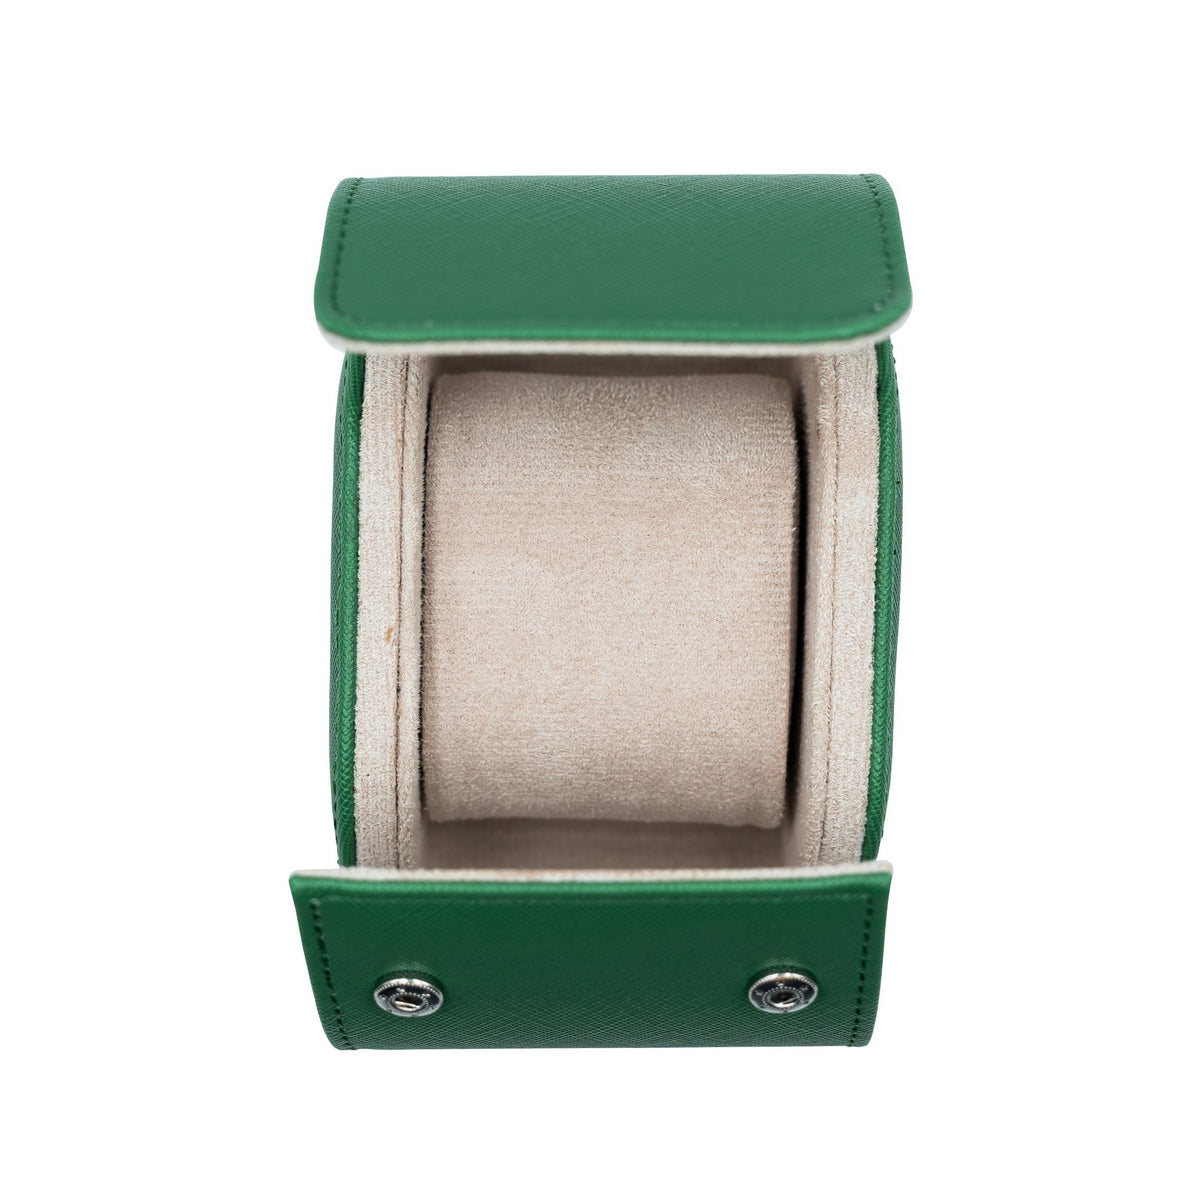 Saffiano Leather Watch Case in Green (1 Slot) - Nomad Watch Works SG